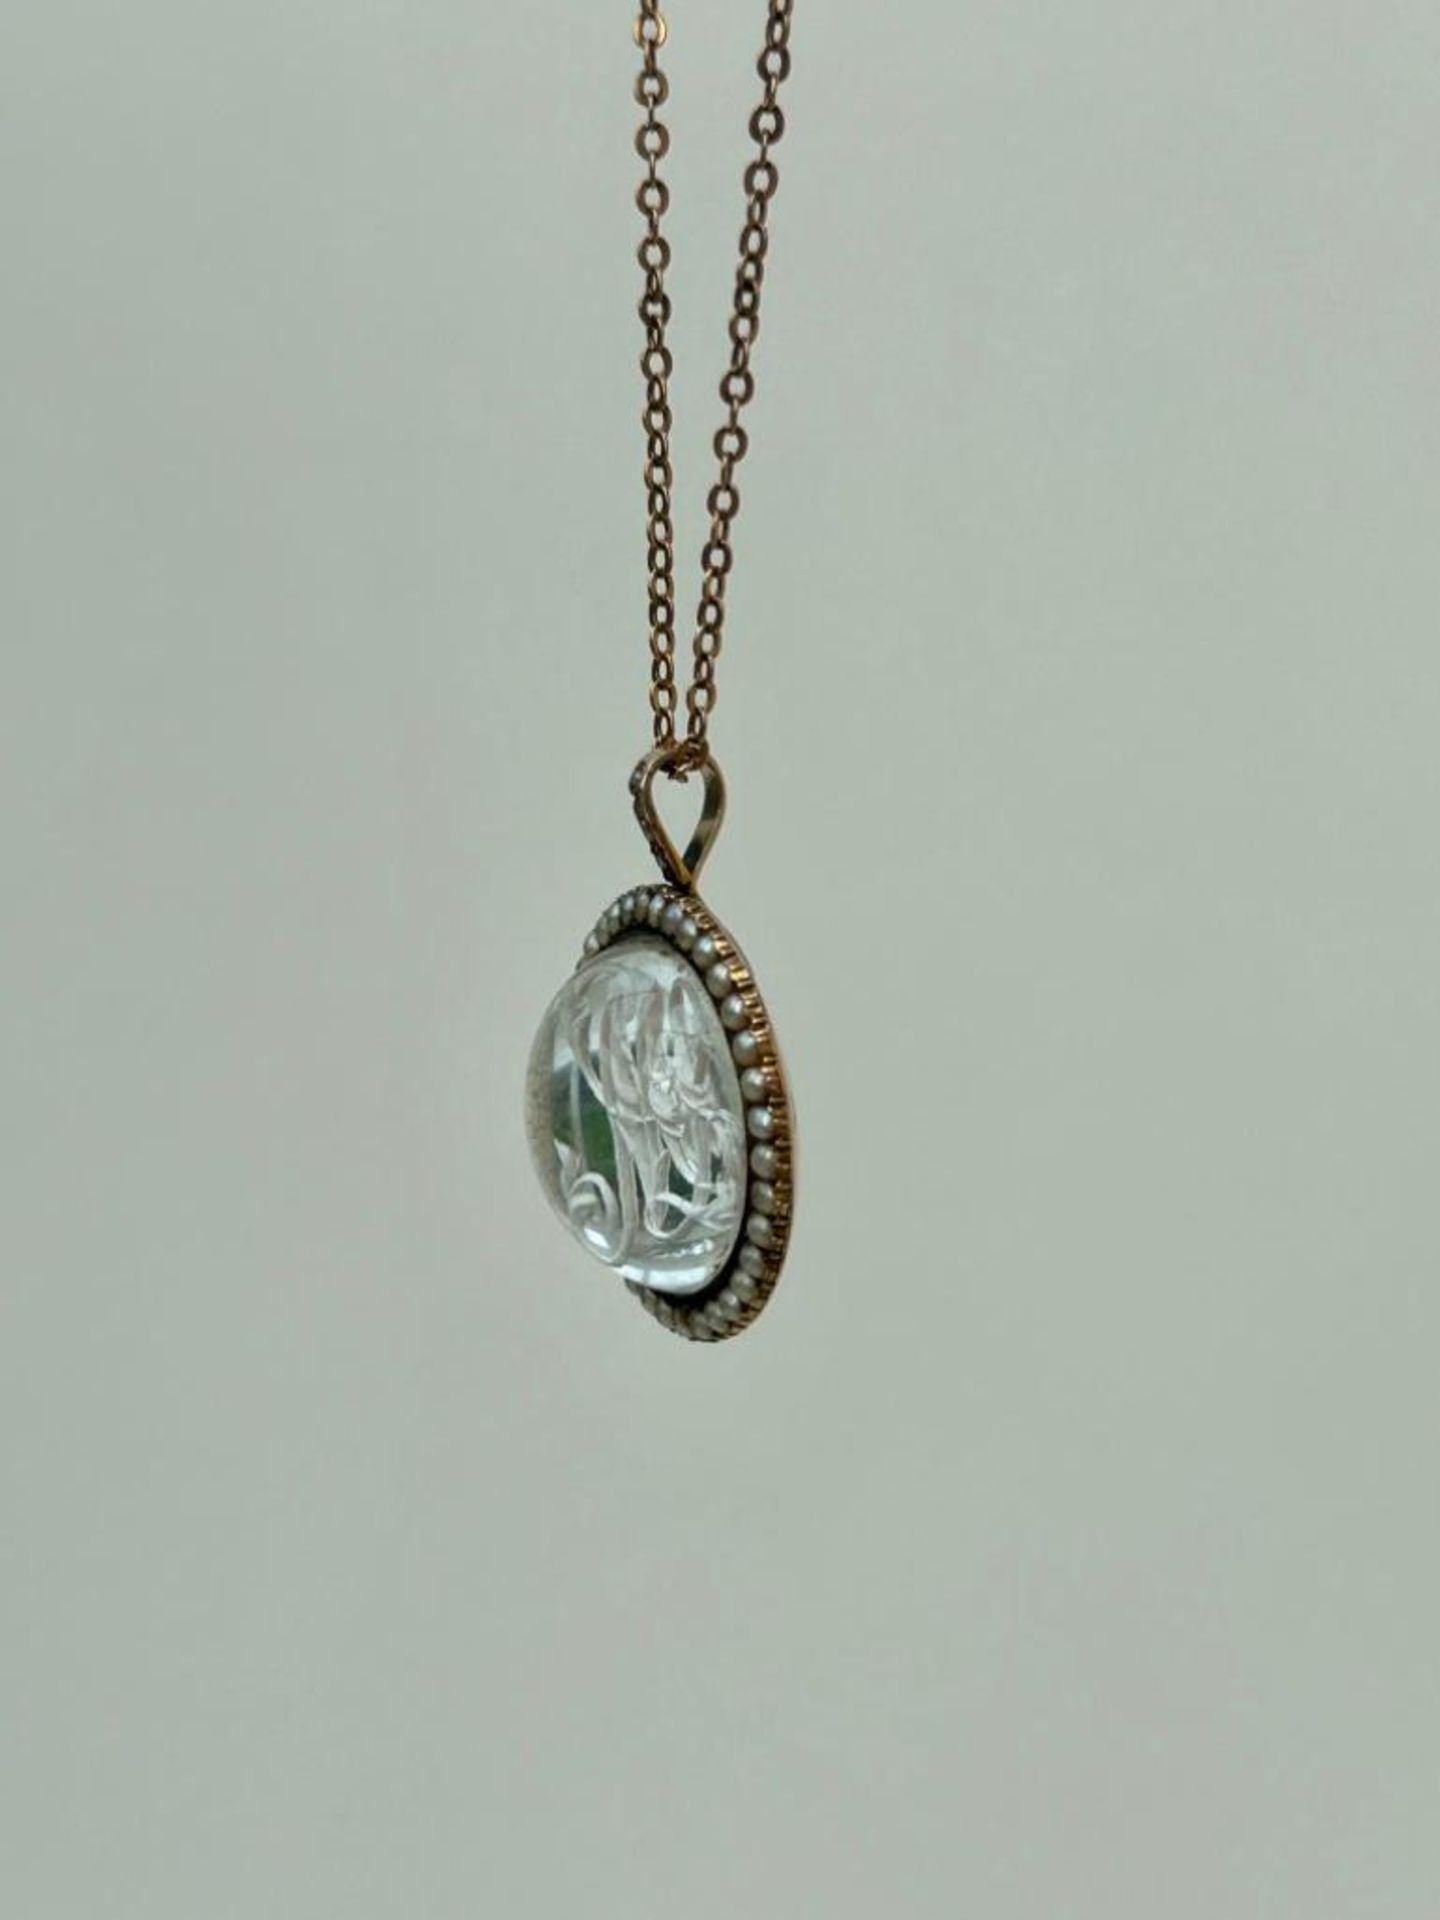 Antique Gold Domed Essex Crystal Monogram and Pearl Surrounded Pendant on Chain - Image 4 of 5